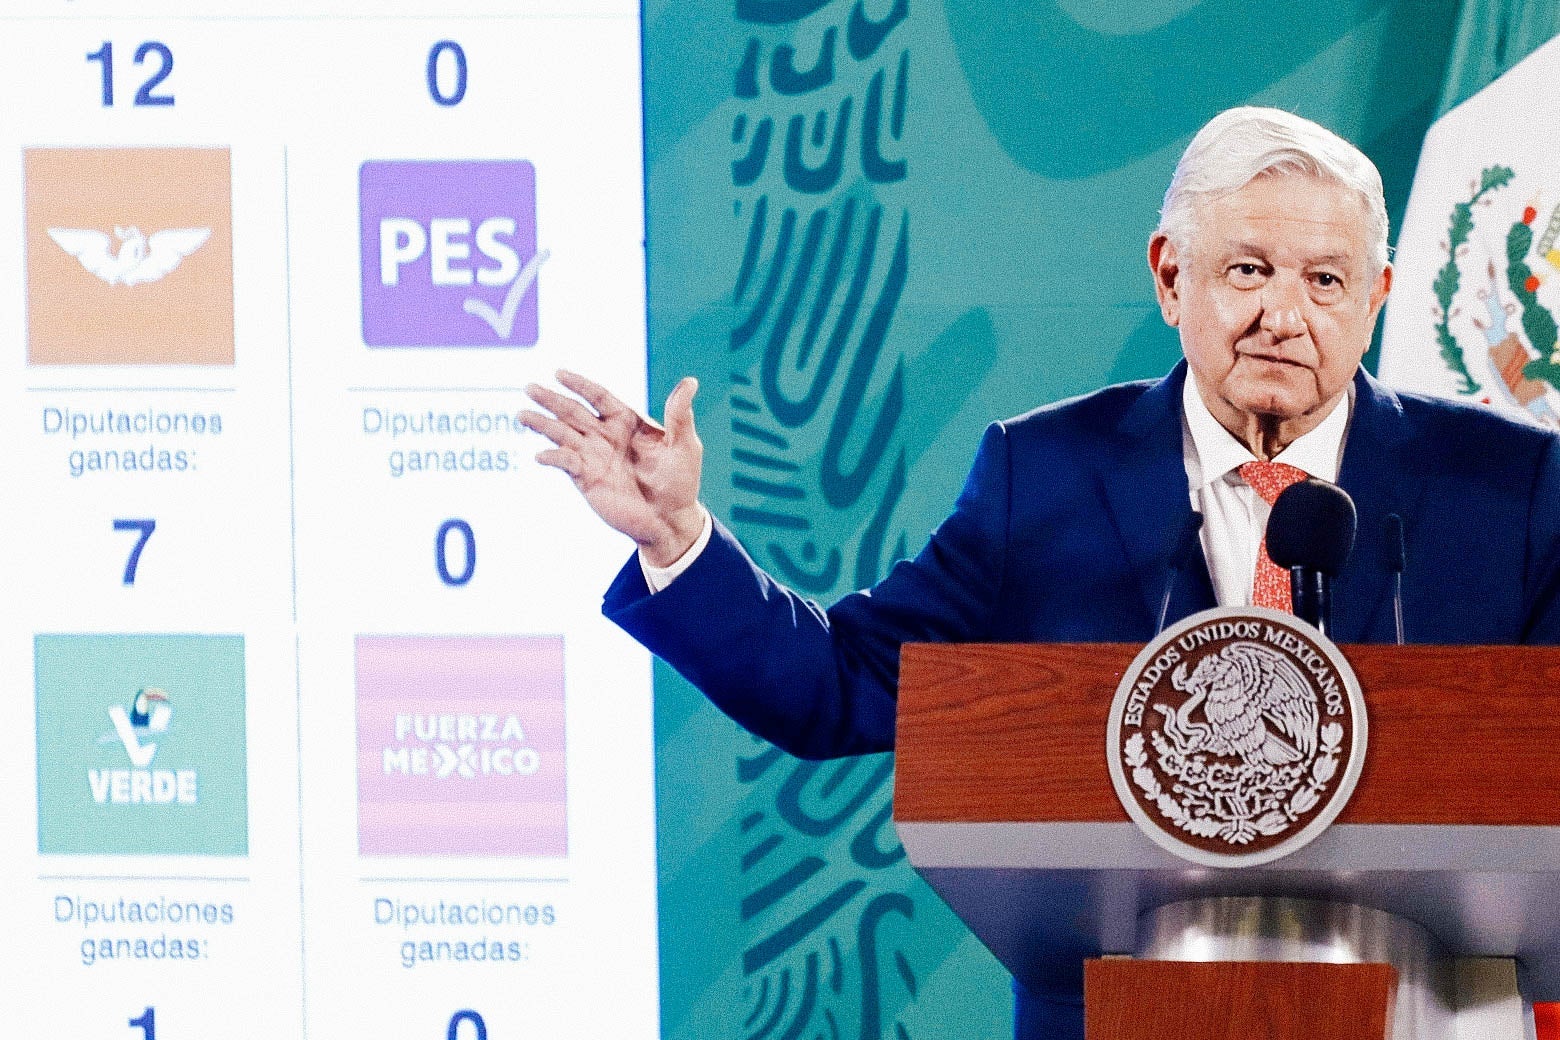 Lopez Obrador stands at a podium gesturing with one arm beside a poster displaying the logos of Mexican political parties, the Green Party among them